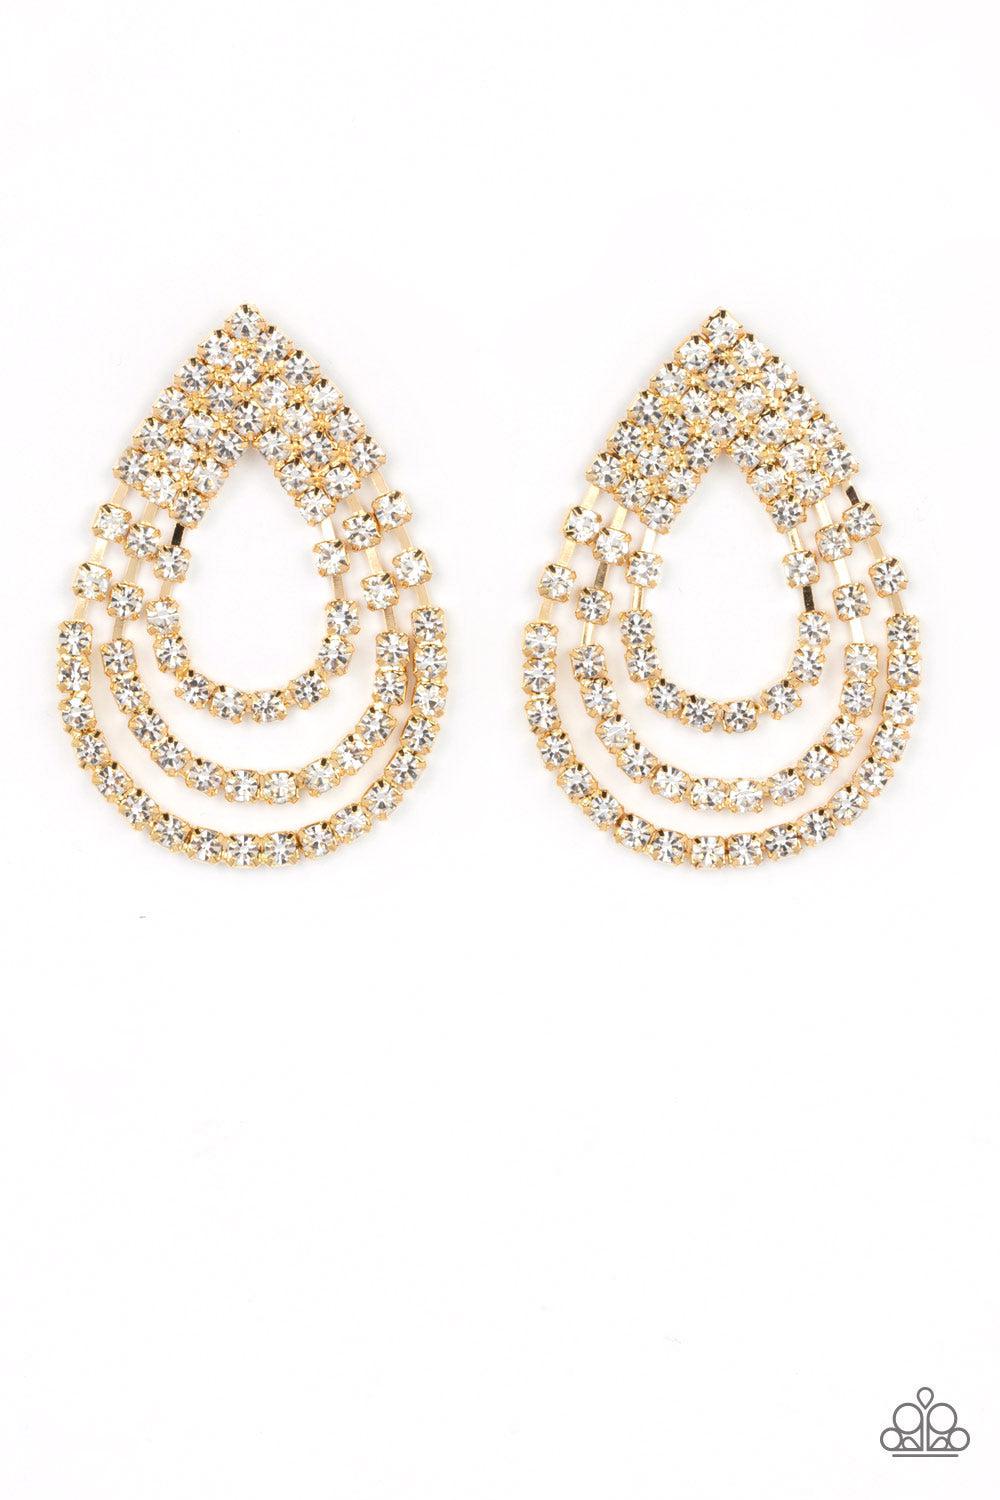 Take a POWER Stance Gold &amp; White Rhinestone Earrings - Paparazzi Accessories- lightbox - CarasShop.com - $5 Jewelry by Cara Jewels